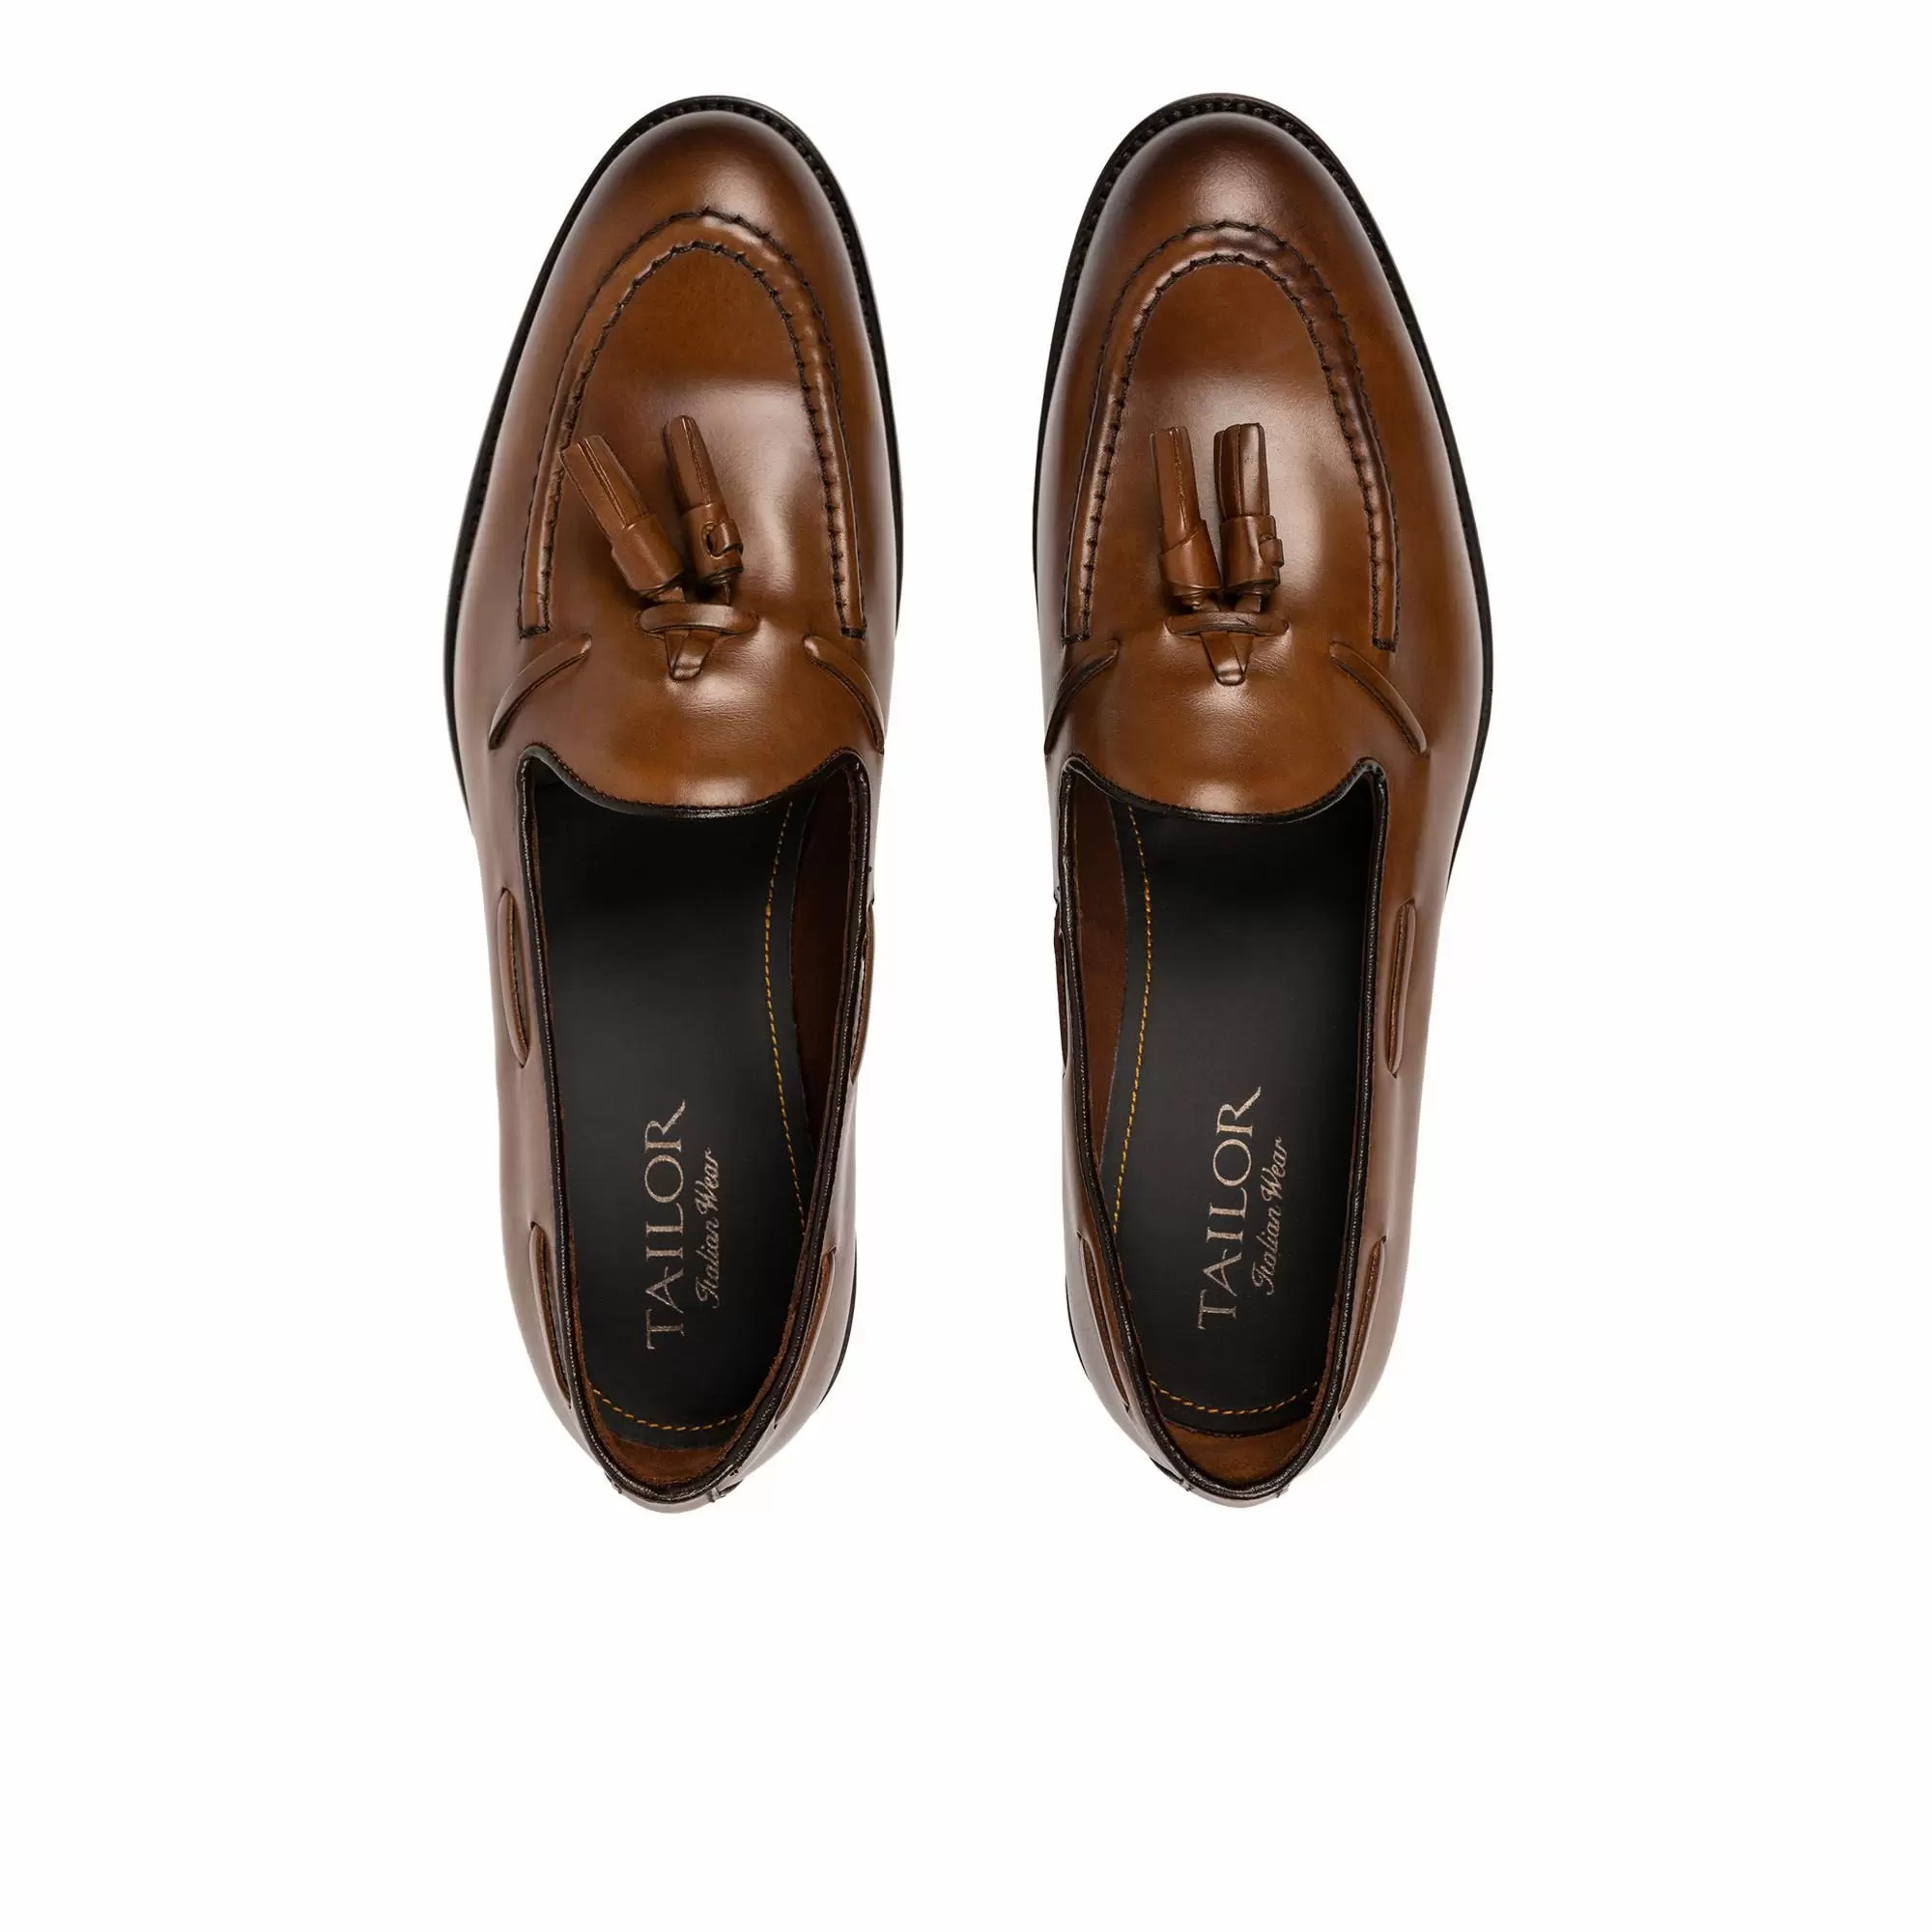 Aνδρικά Δερμάτινα Loafers Με Φουντάκια Ταμπά Tailor Italian Wear